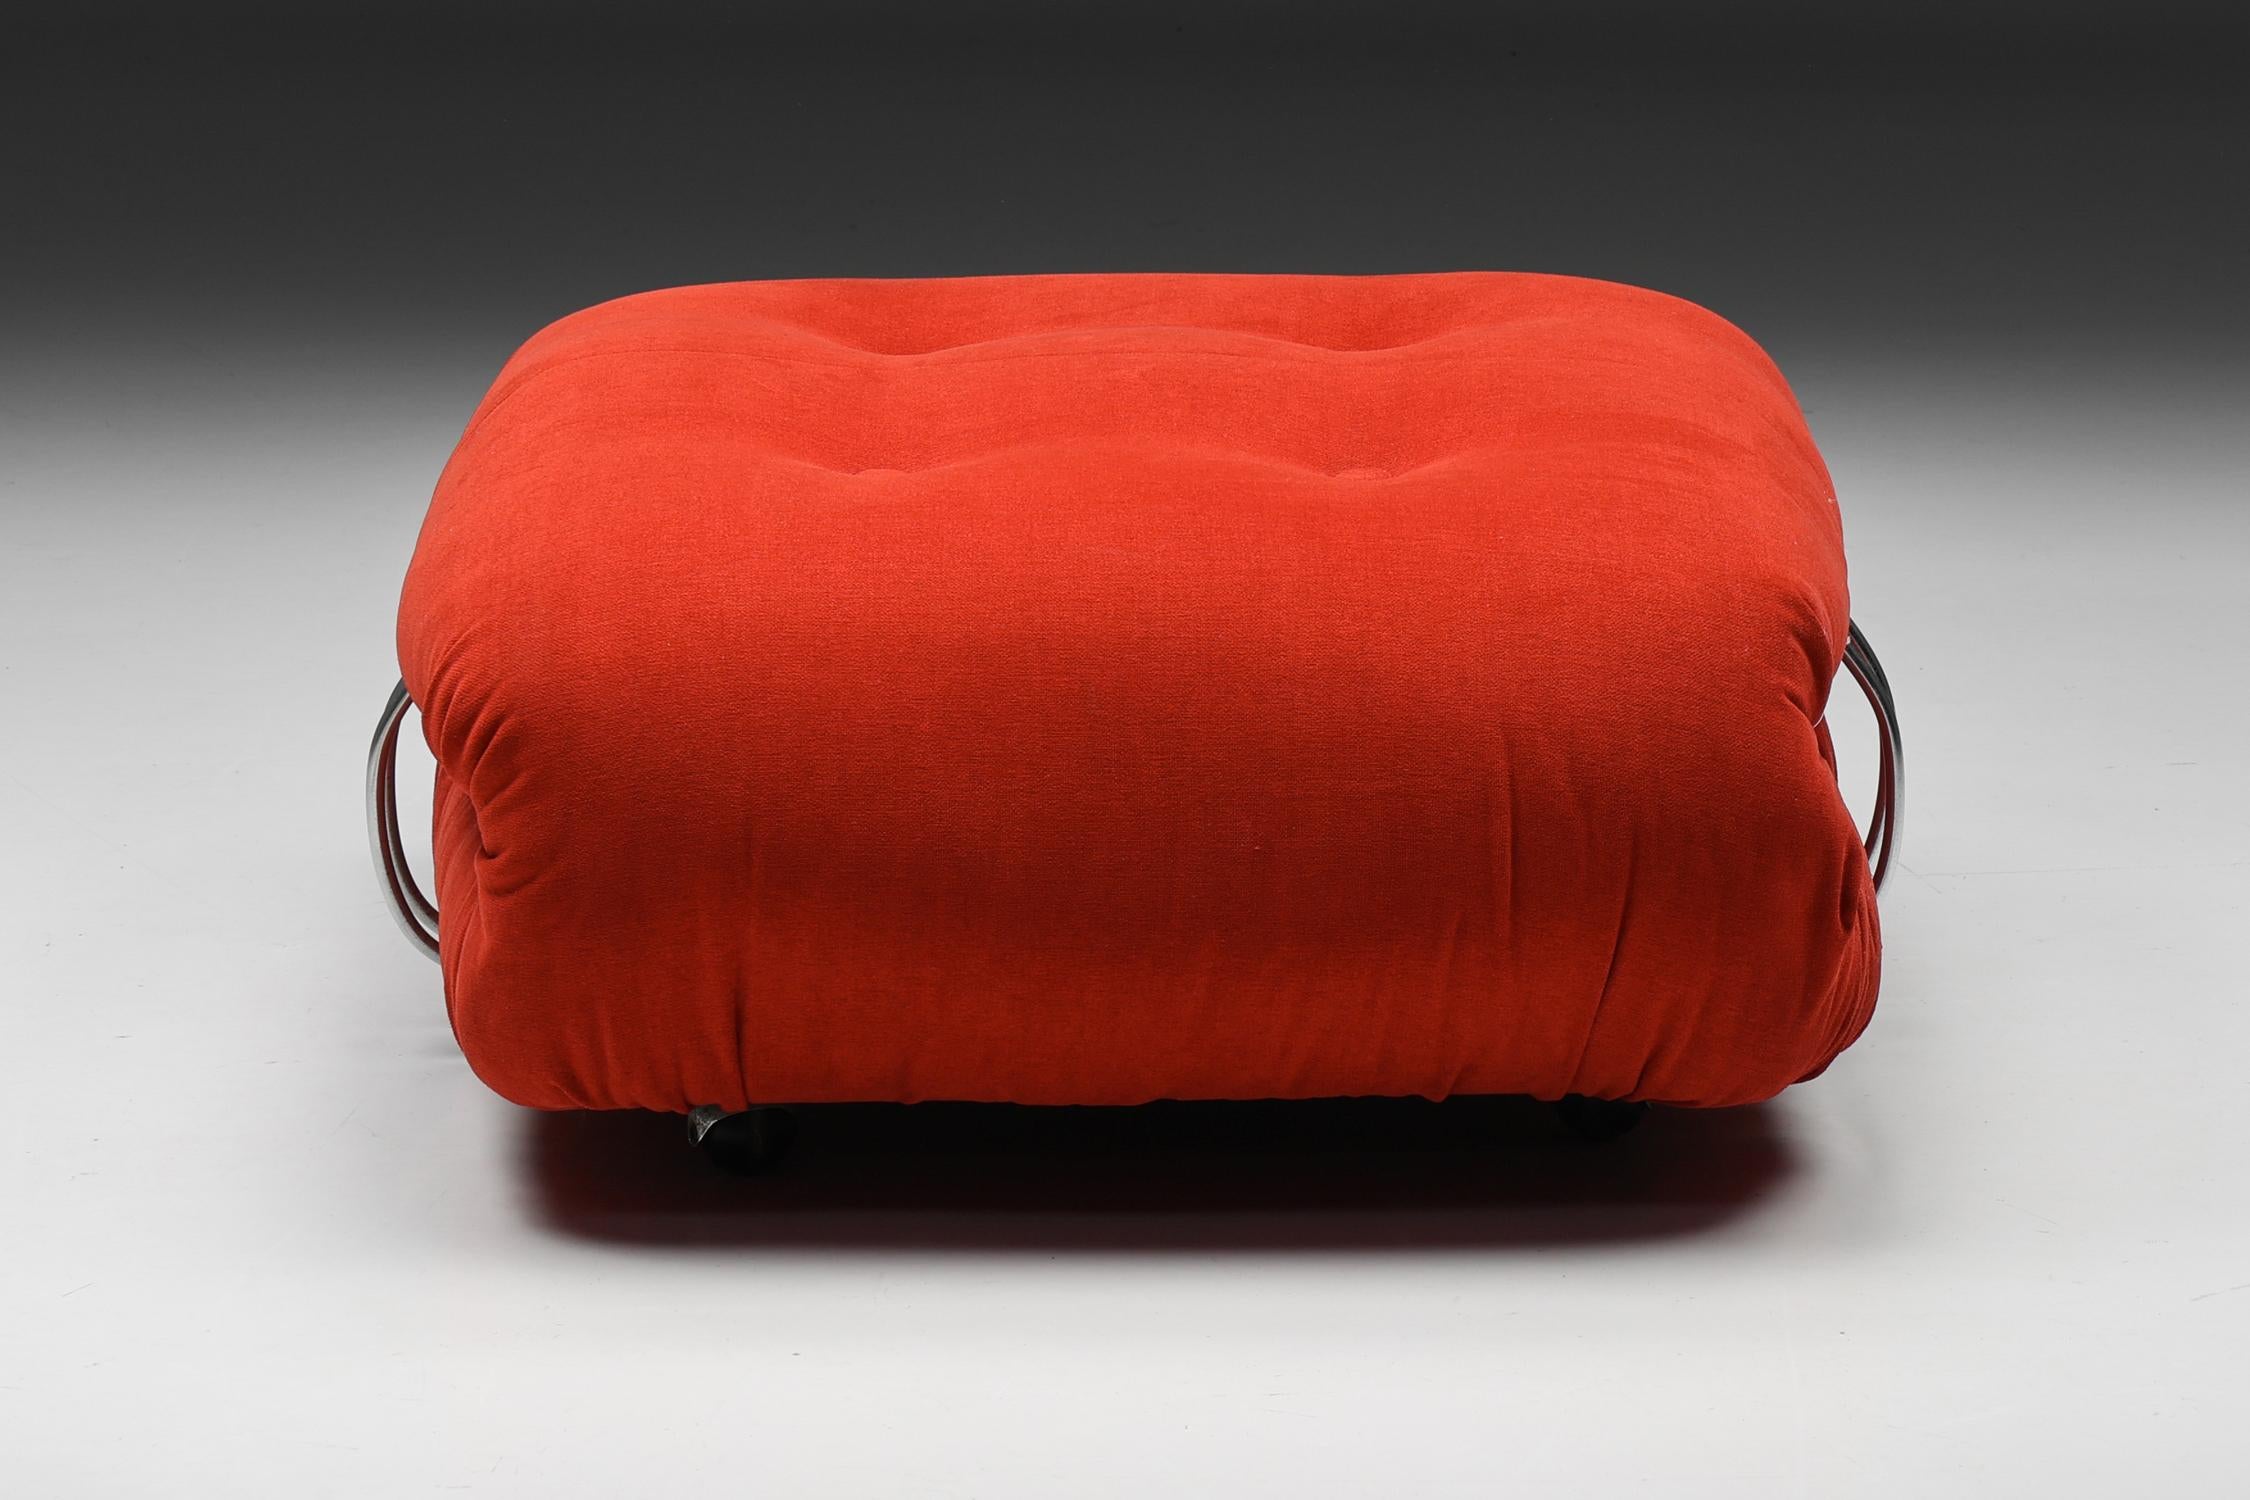 Late 20th Century Soriana Pouf by Afra & Tobia Scarpa for Cassina, 1970s For Sale